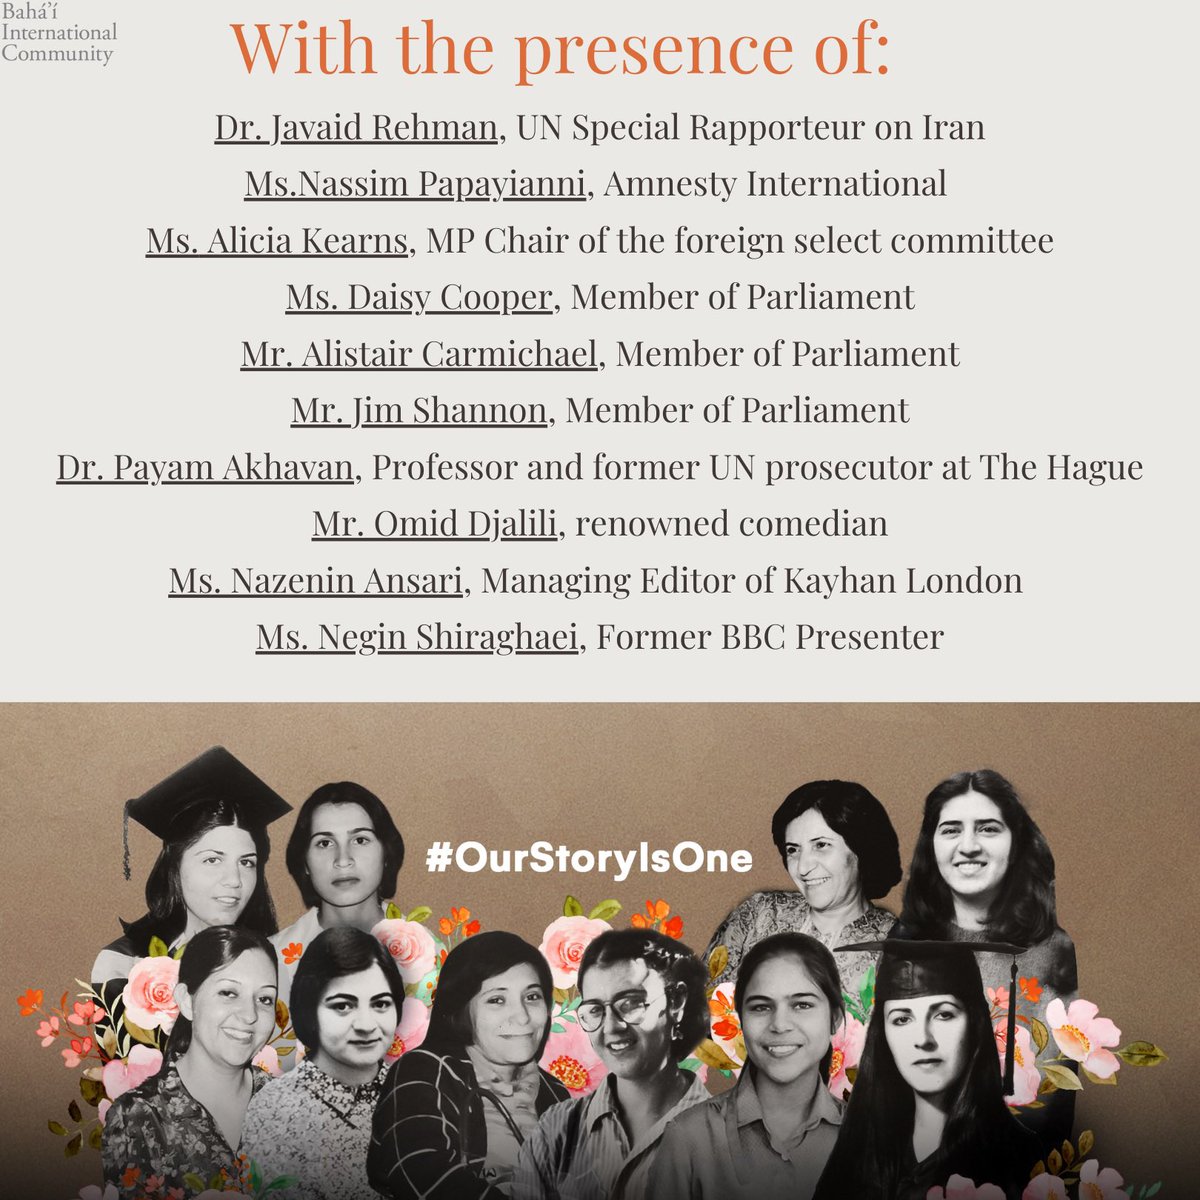 Join us virtually tonight for the Global Commemorative Event of the “Our Story Is One” campaign! #event #London #OurStoryIsOne #bahai #bahaifaith #iran #humanrights #women_of_iran #womenofiran #equality #genderequality #womenrights #shiraz #art #video #داستان_ما_یکیست